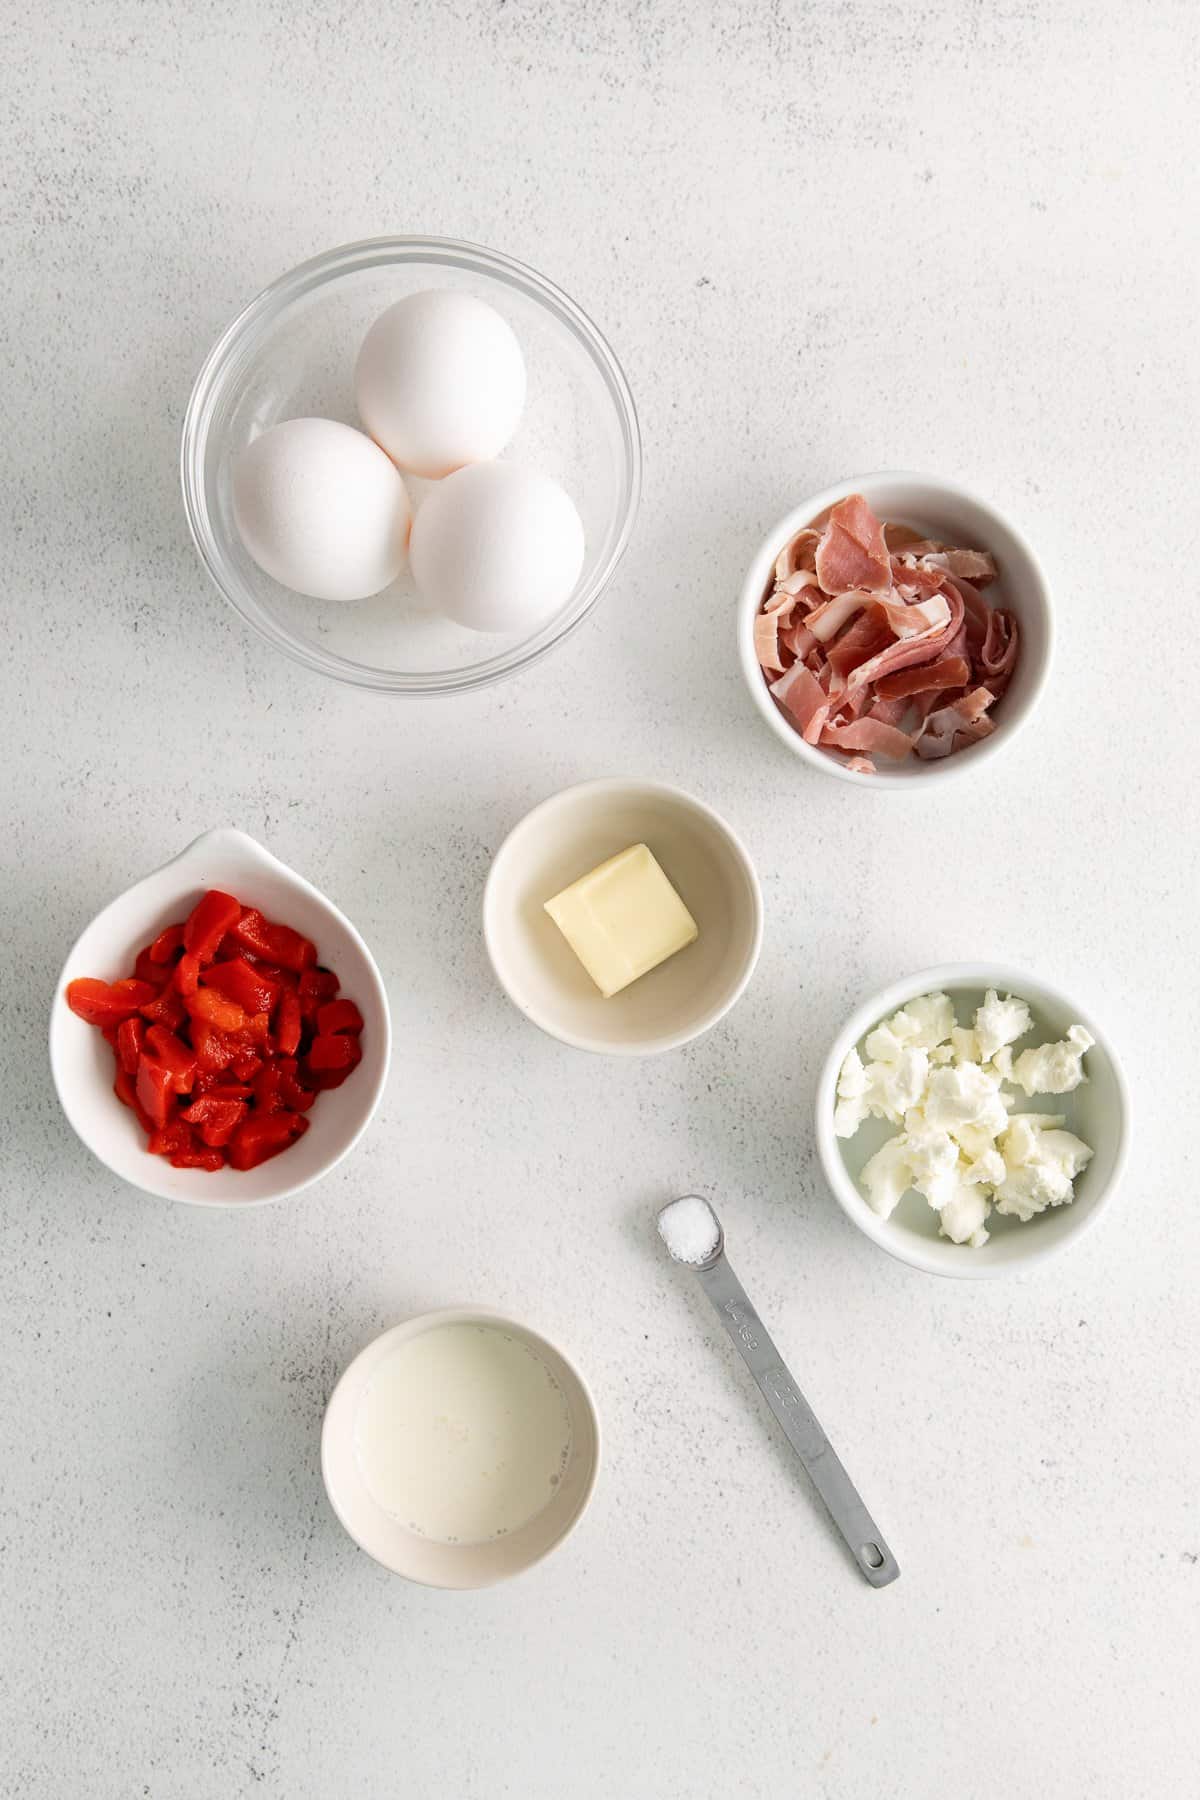 All of the ingredients for a goat cheese omelet in small bowls. 